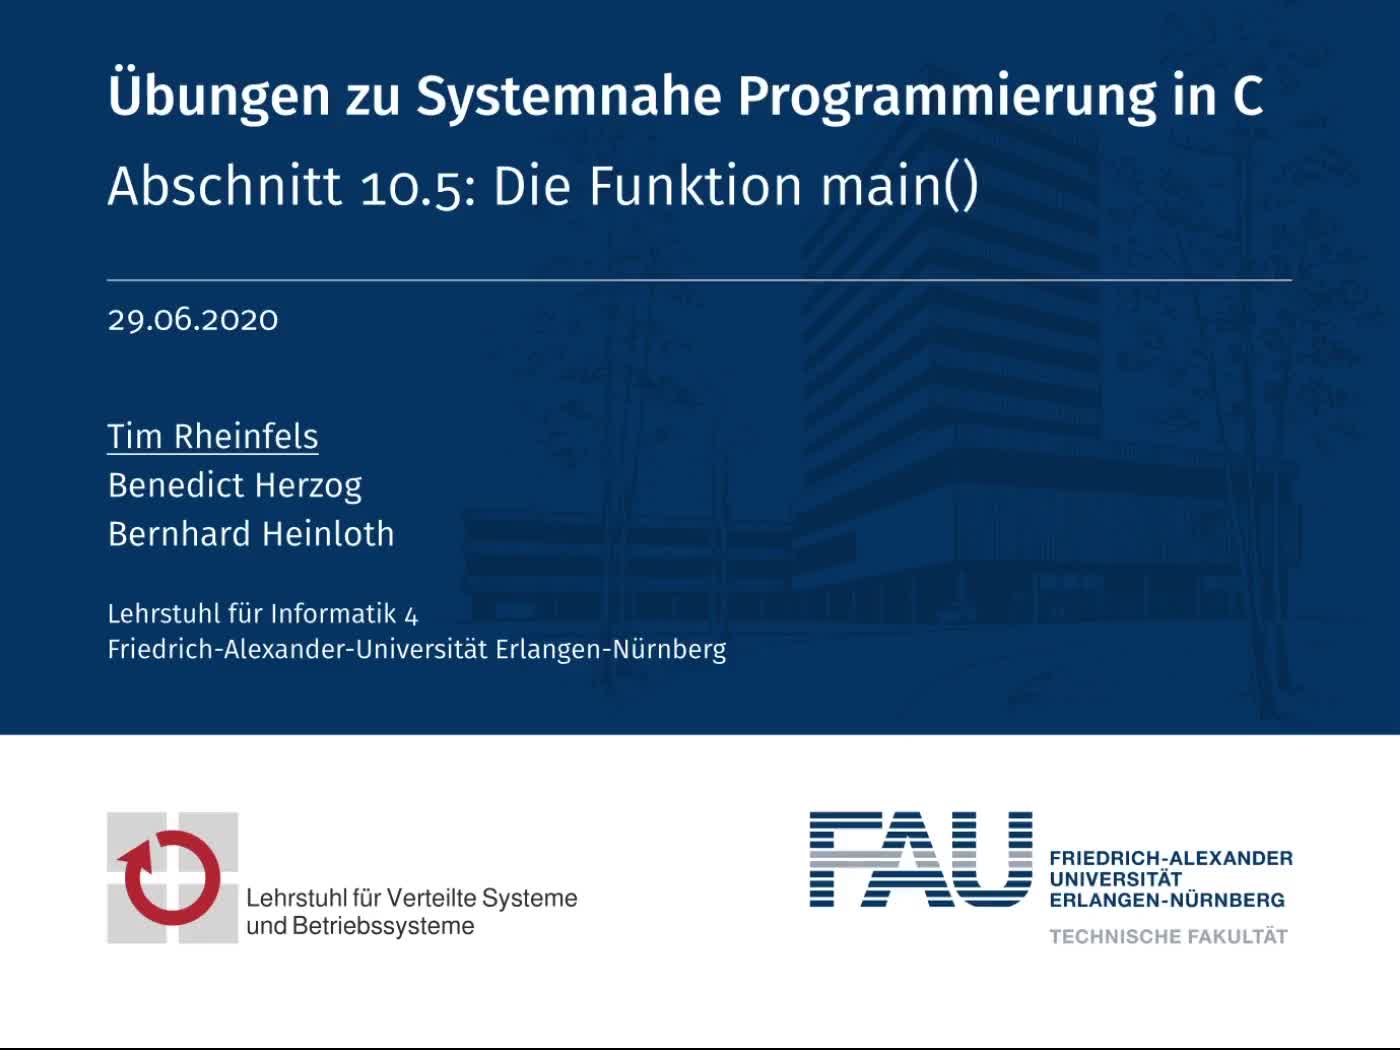 10.5: Die Funktion main() preview image